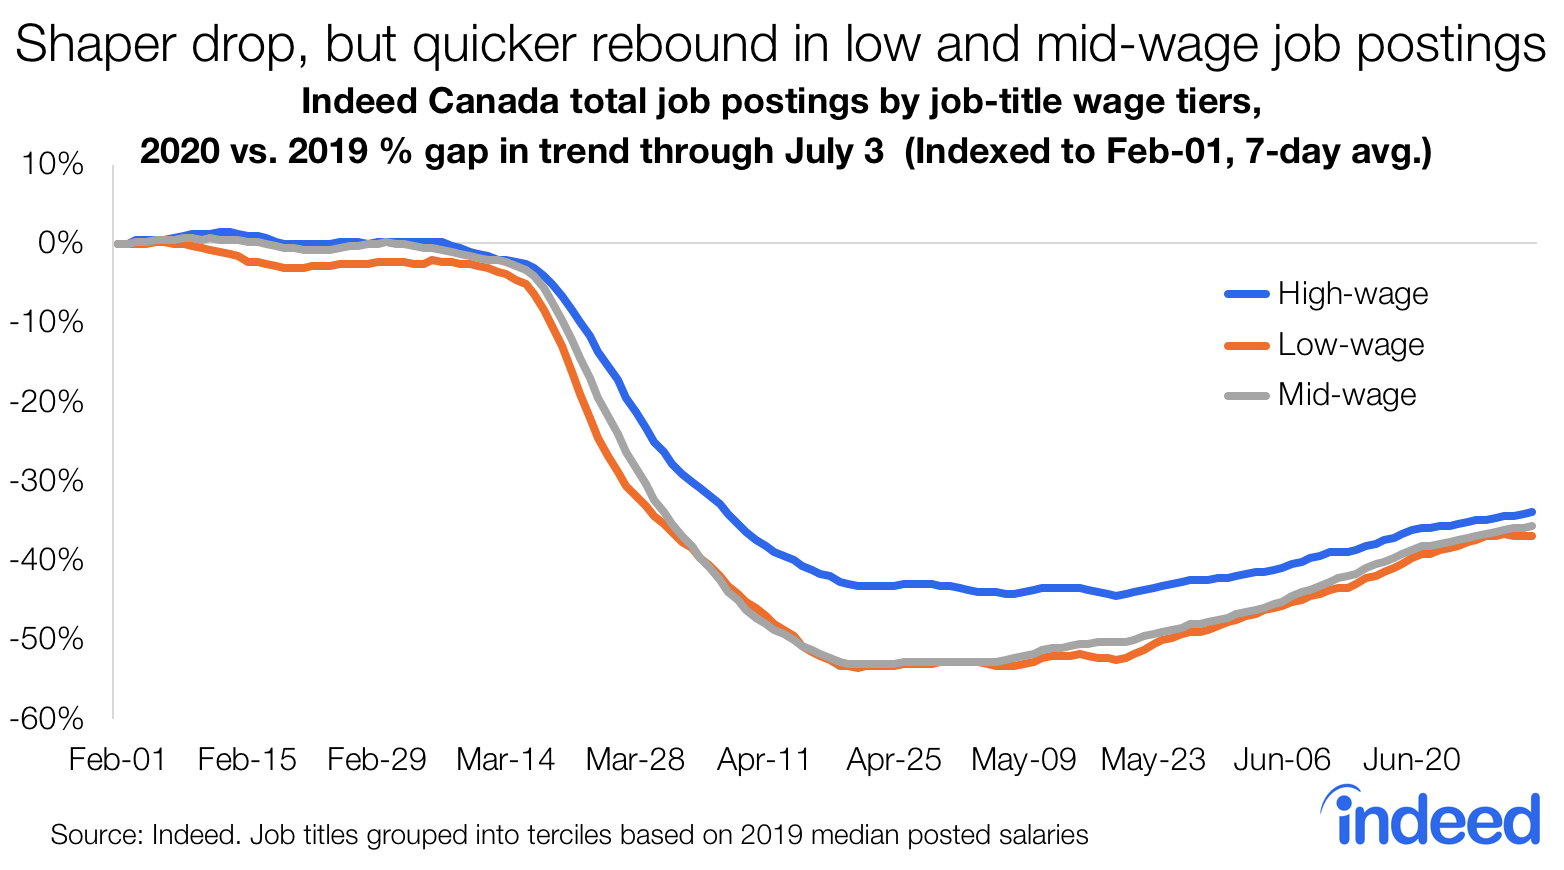 Lin graph shows sharper drop, but quicker rebound in low and mid-wage job postings.